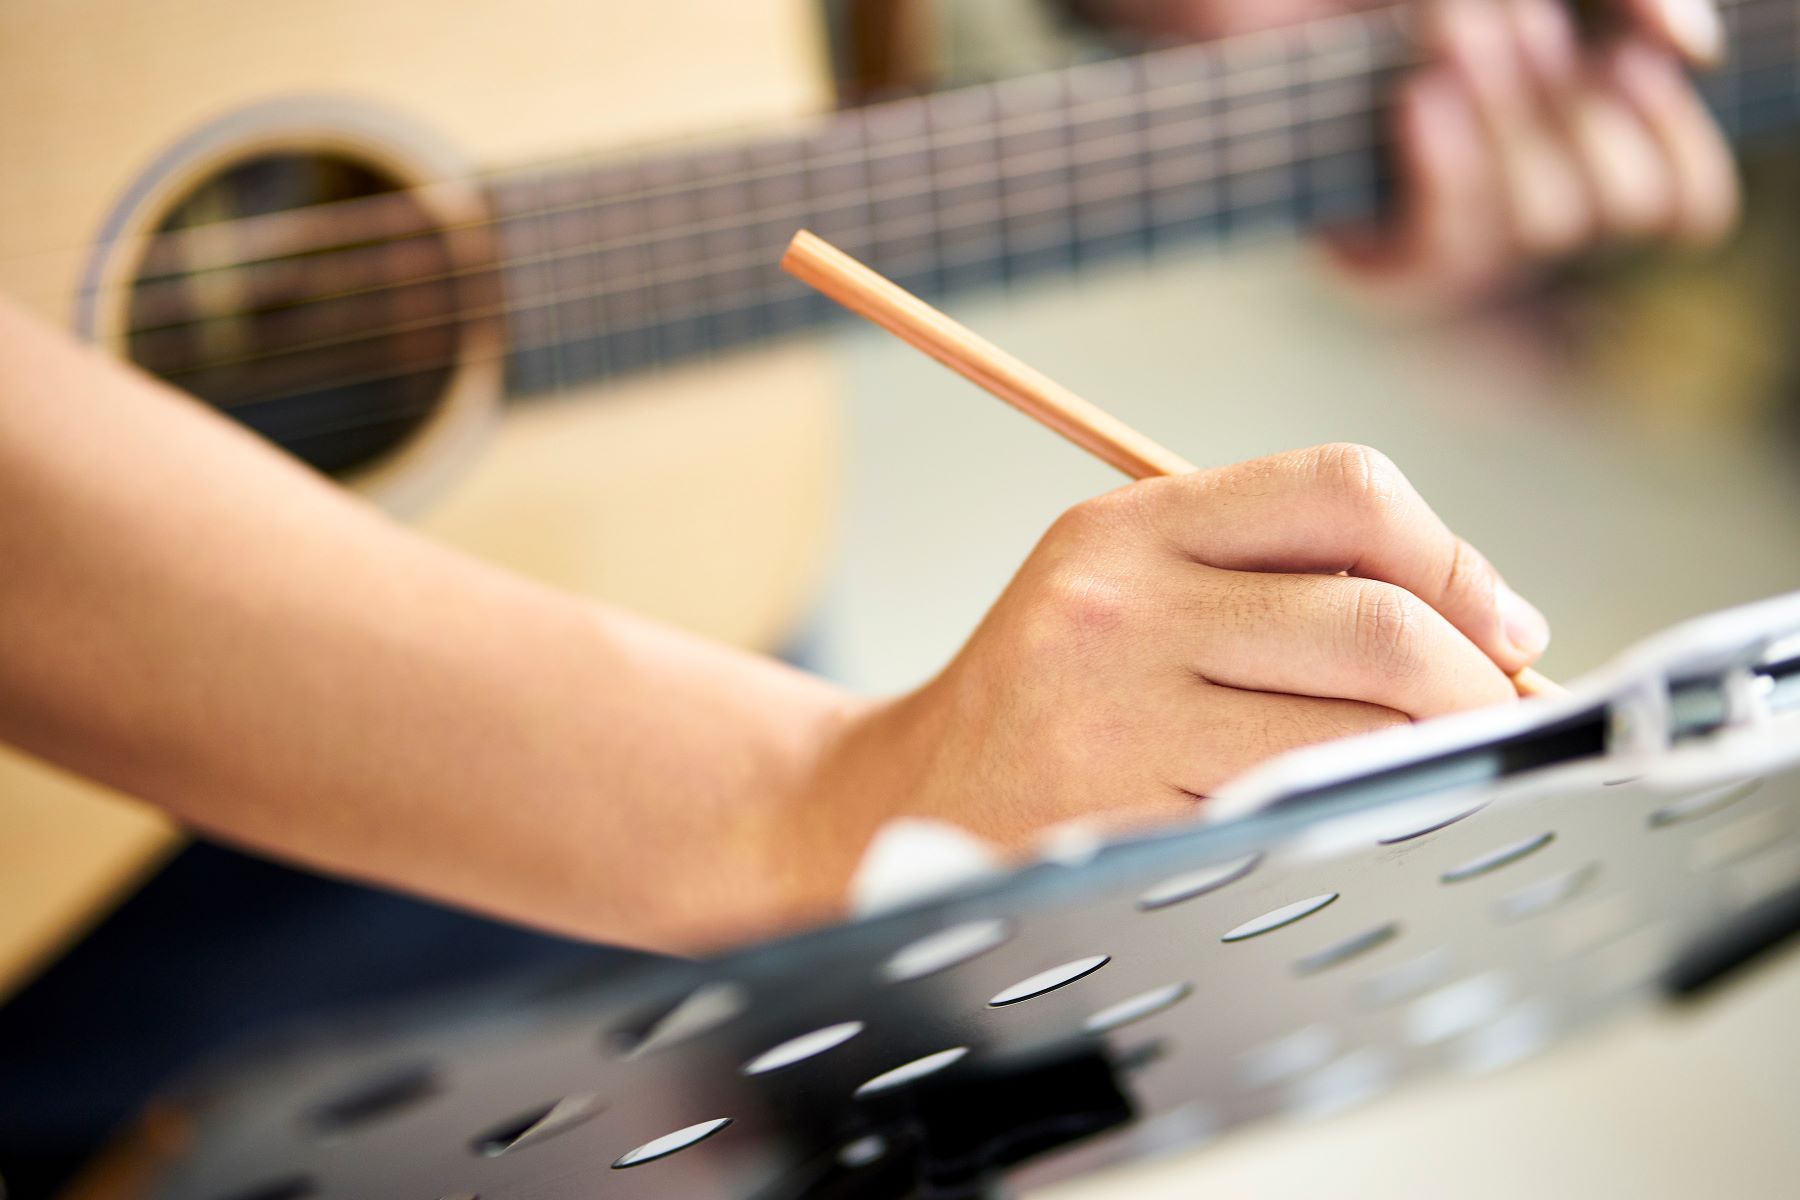 Using chords as a start to composing music